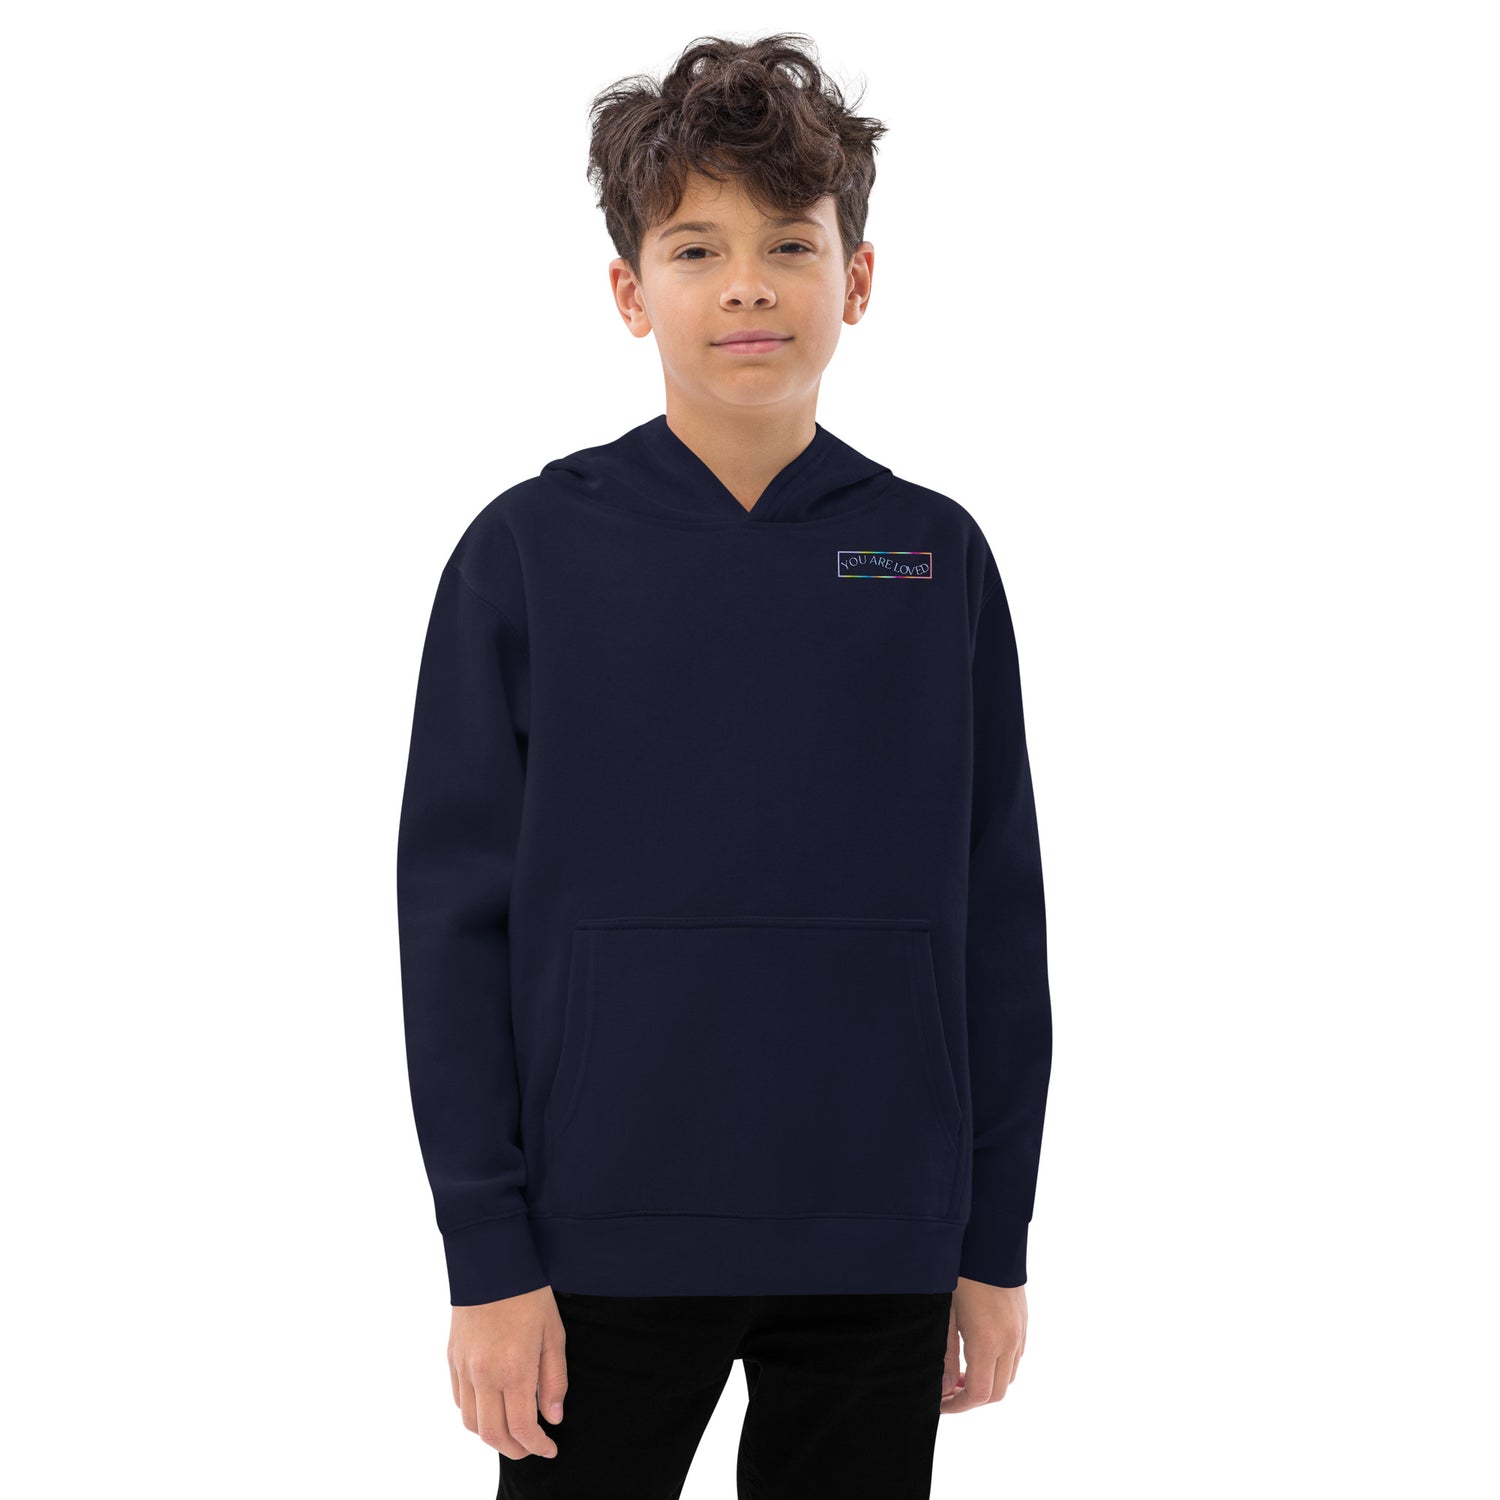 Indigo Kidswear hoodie features a vibrant design that says "You are loved".